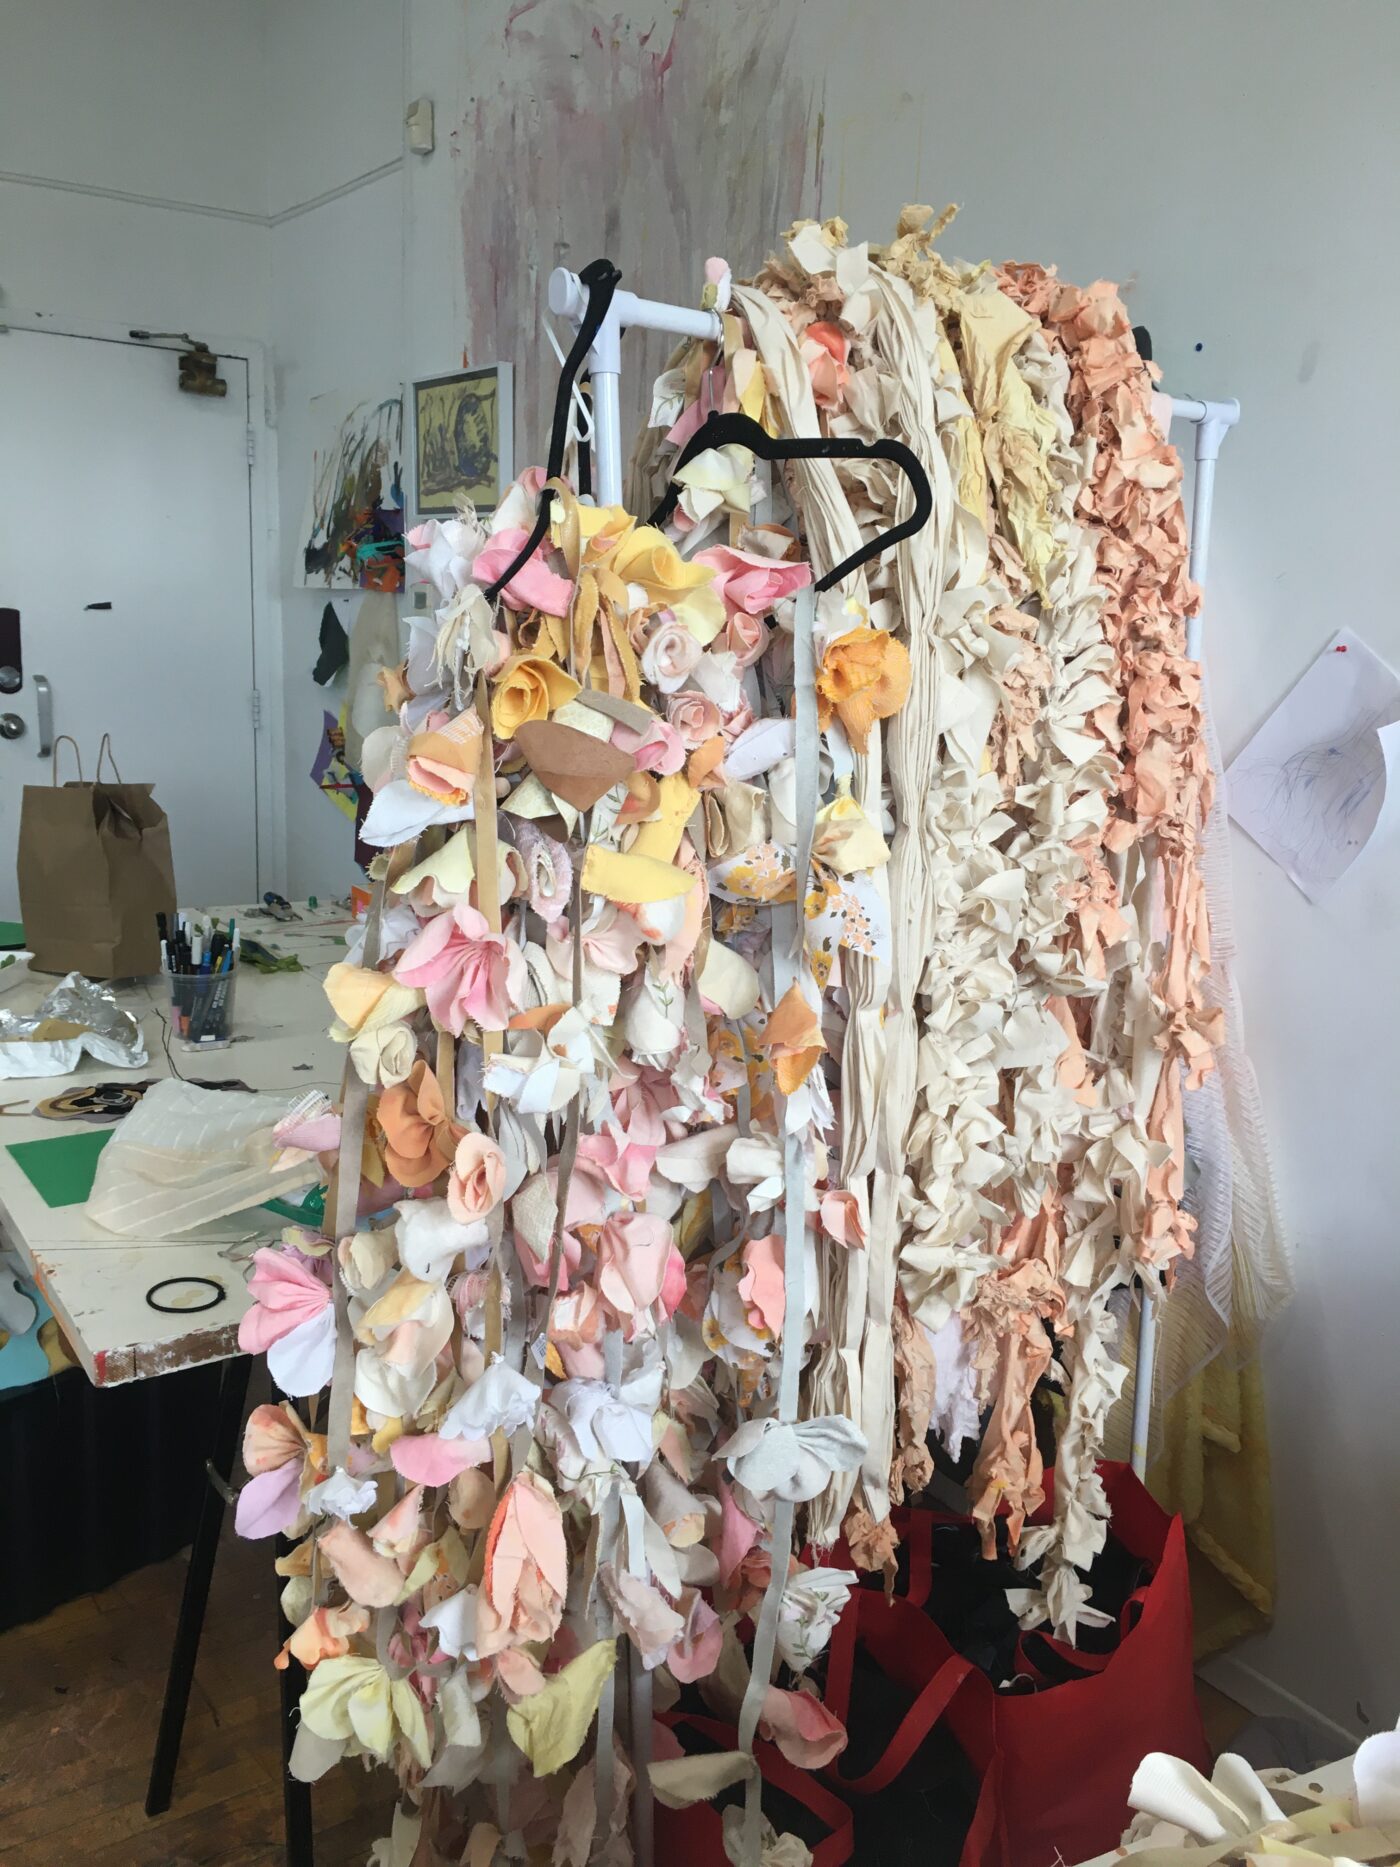 A large pile of textile sculpted flowers. The flowers are various pastel warm tones, ranging from whites, to pink, yellow and orange.